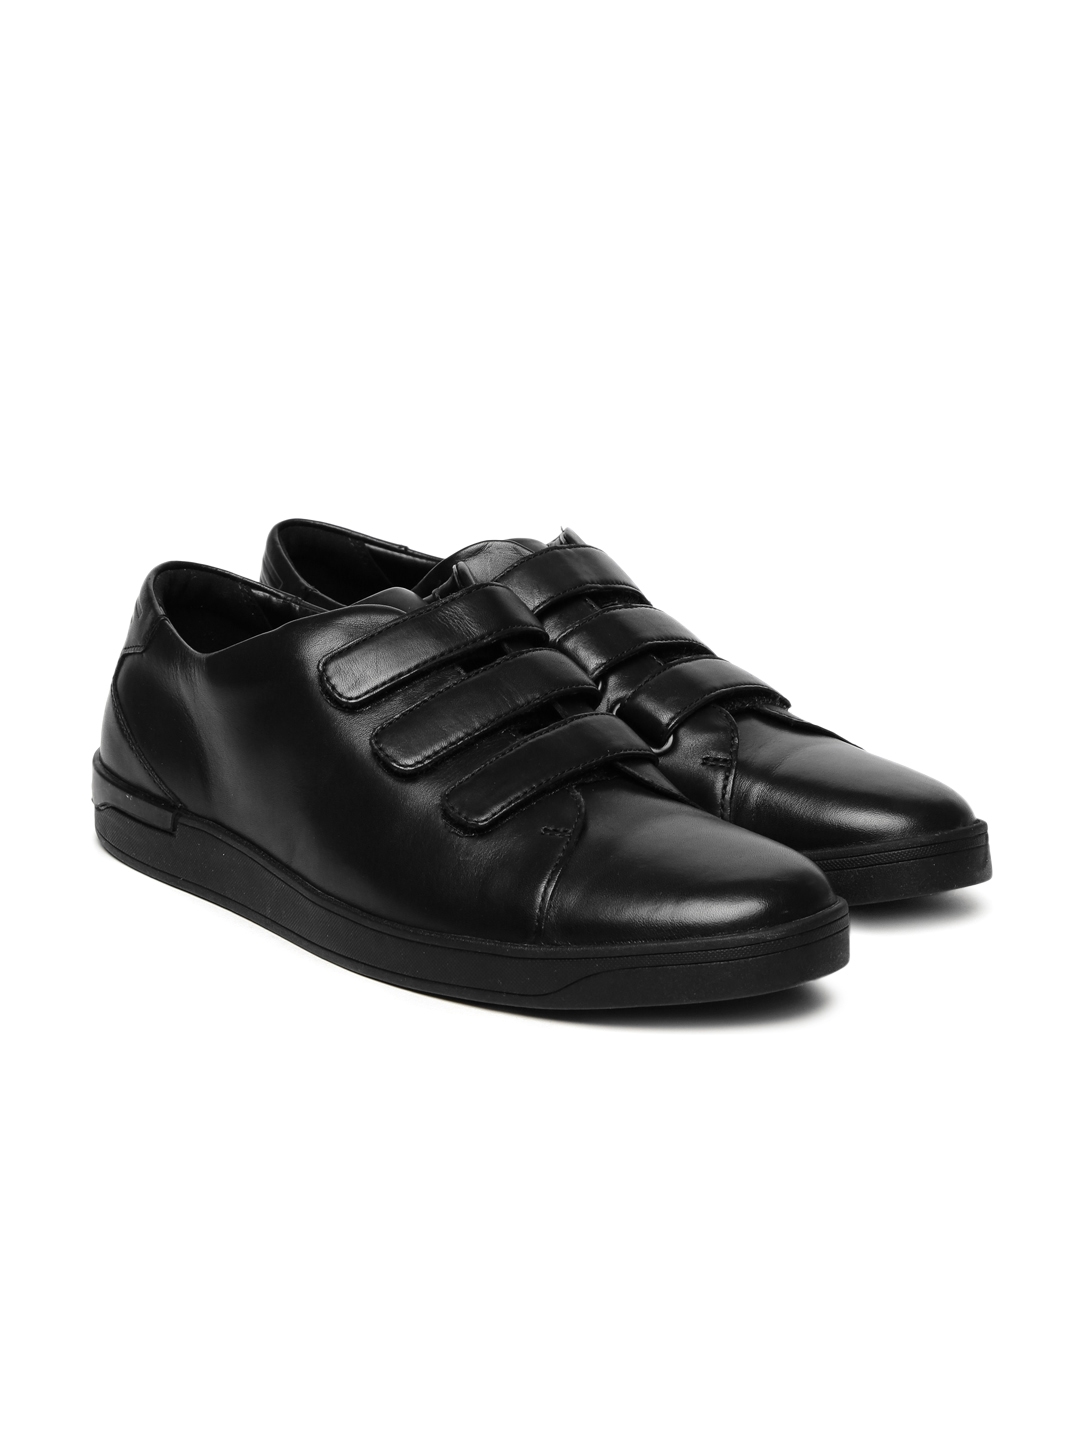 Clarks Stanway Flow Leather Shoes in Black 